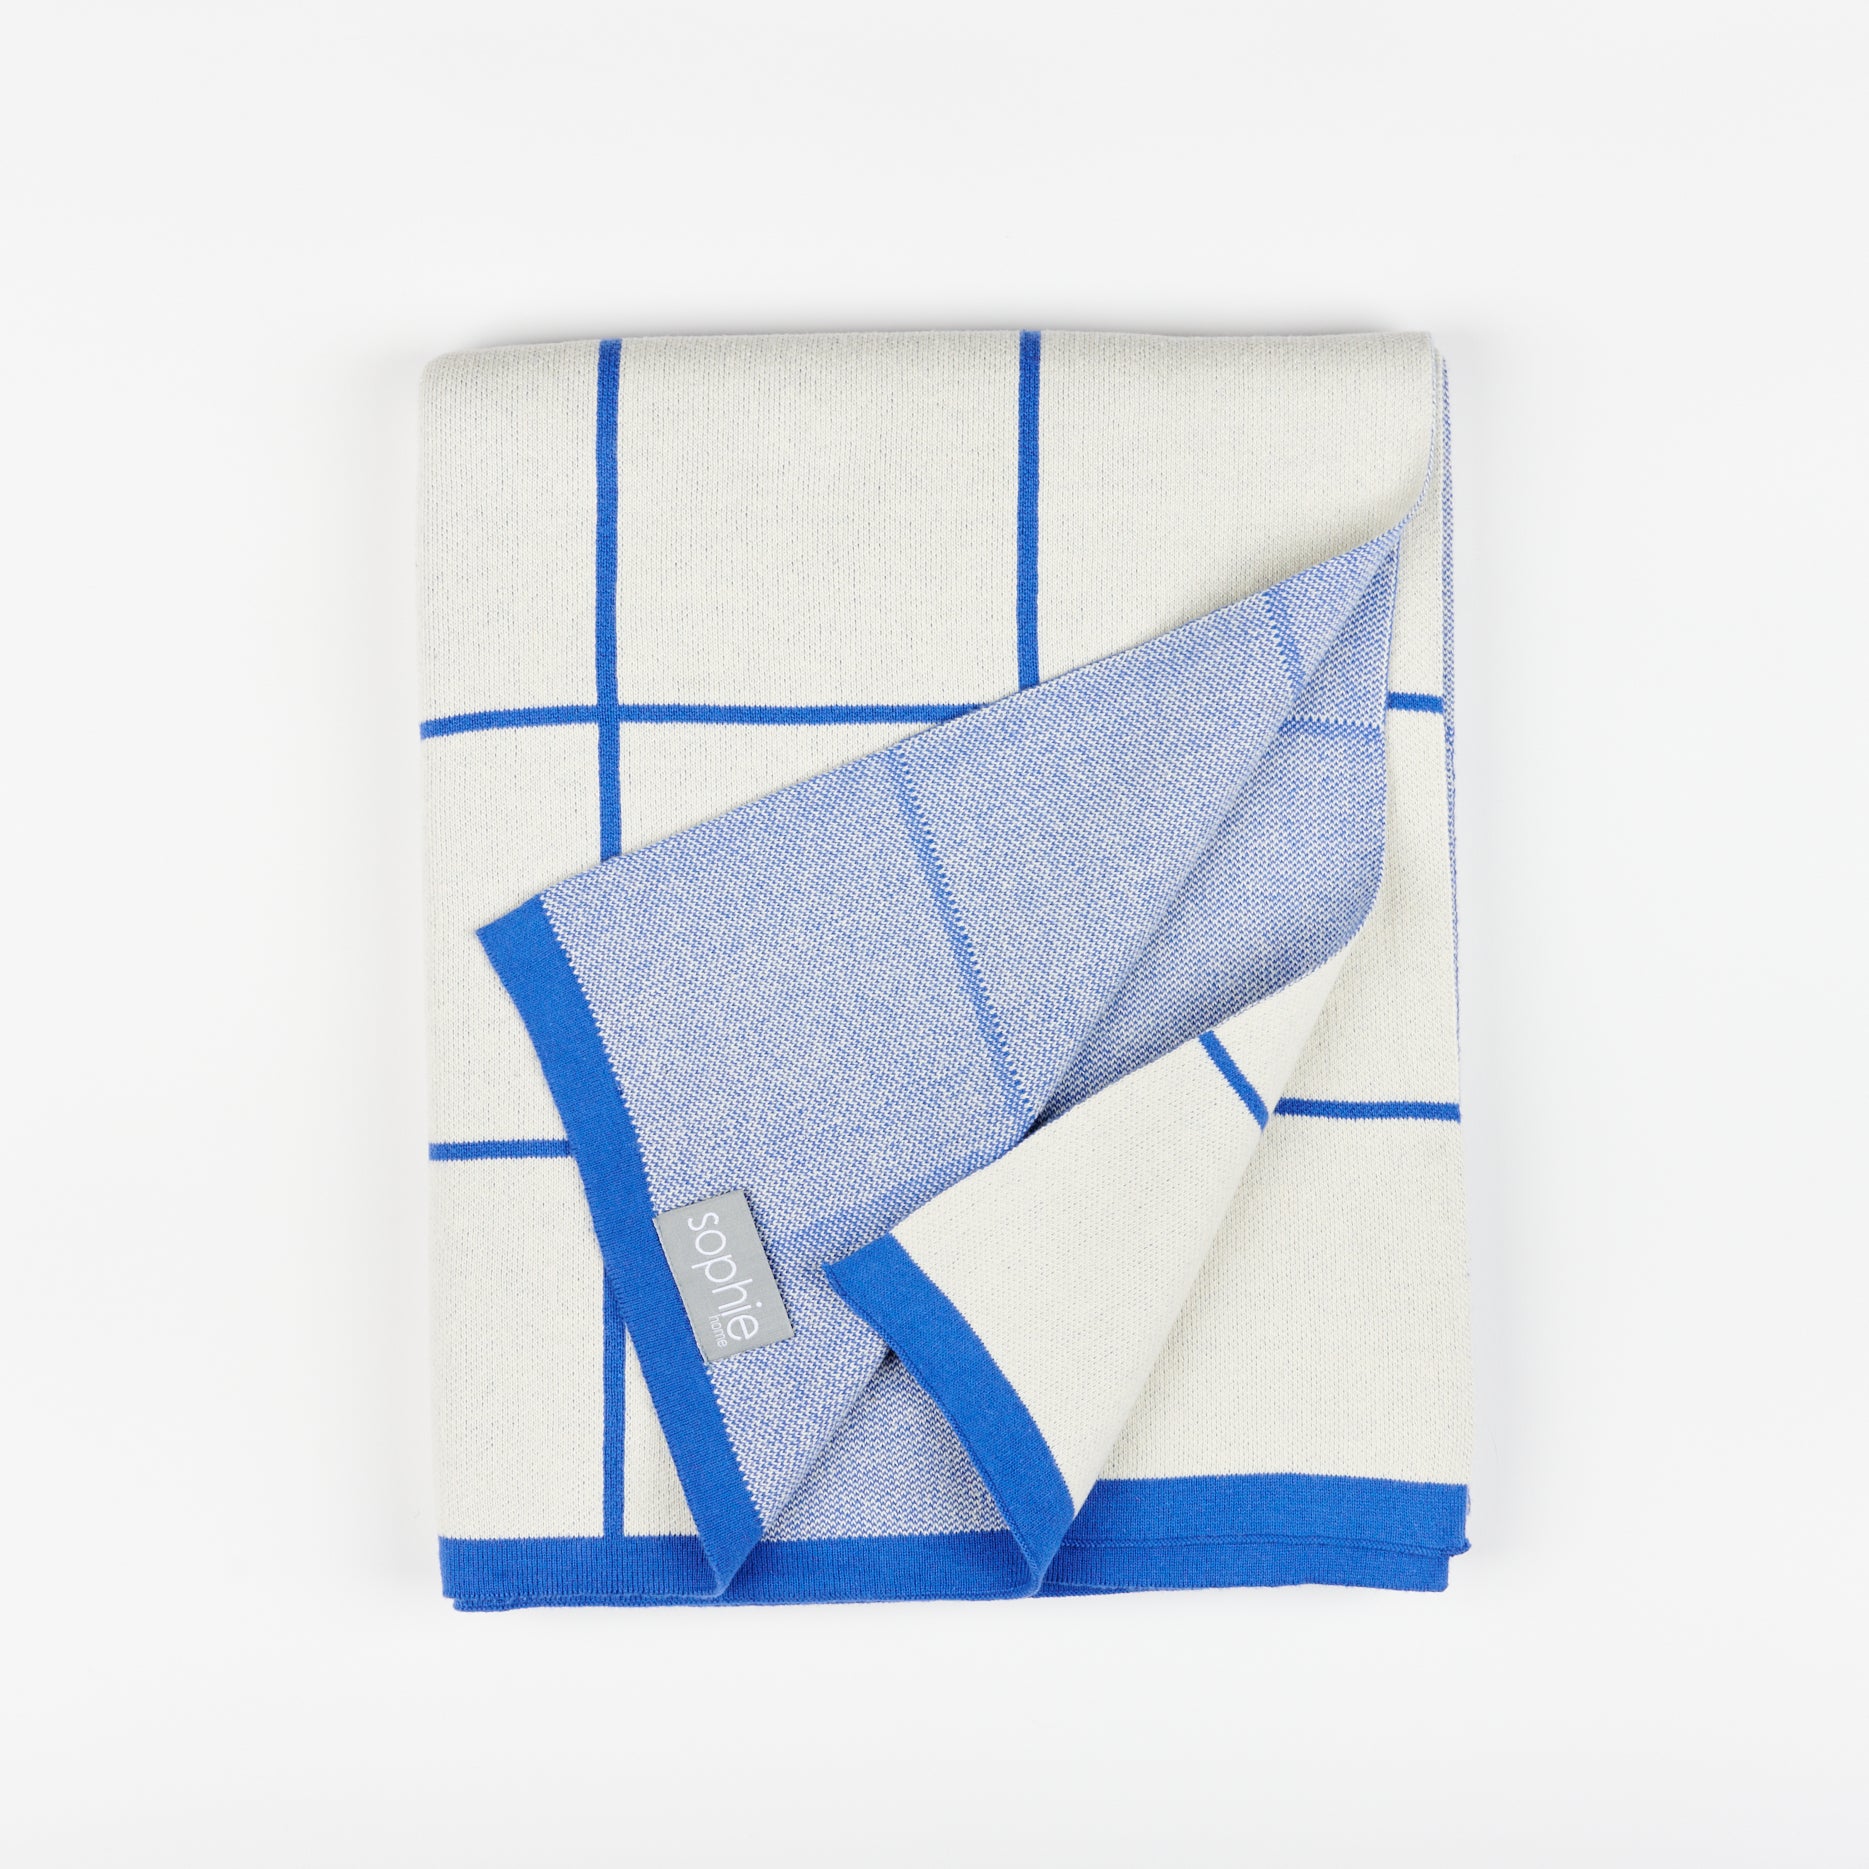 Sophie Home grid cotton knit throw blanket in cobalt with corner lifted to show tag and underside of the blanket